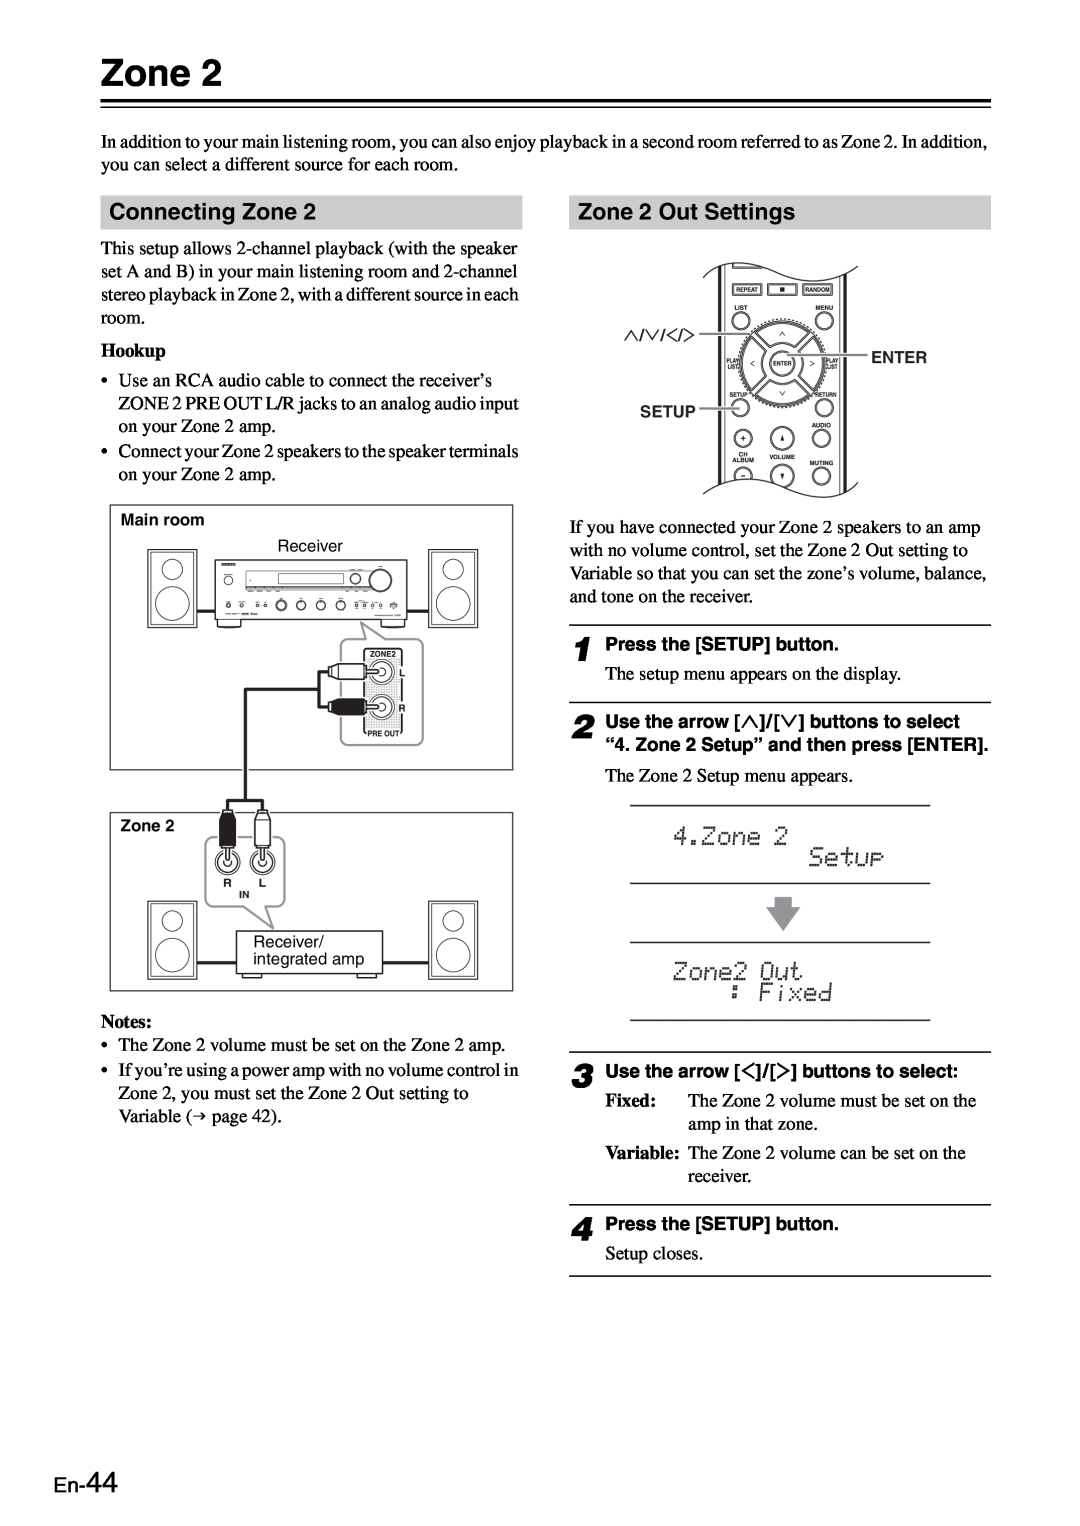 Onkyo TX-8050 instruction manual Connecting Zone, Zone 2 Out Settings, En-44, Hookup, Press the SETUP button 